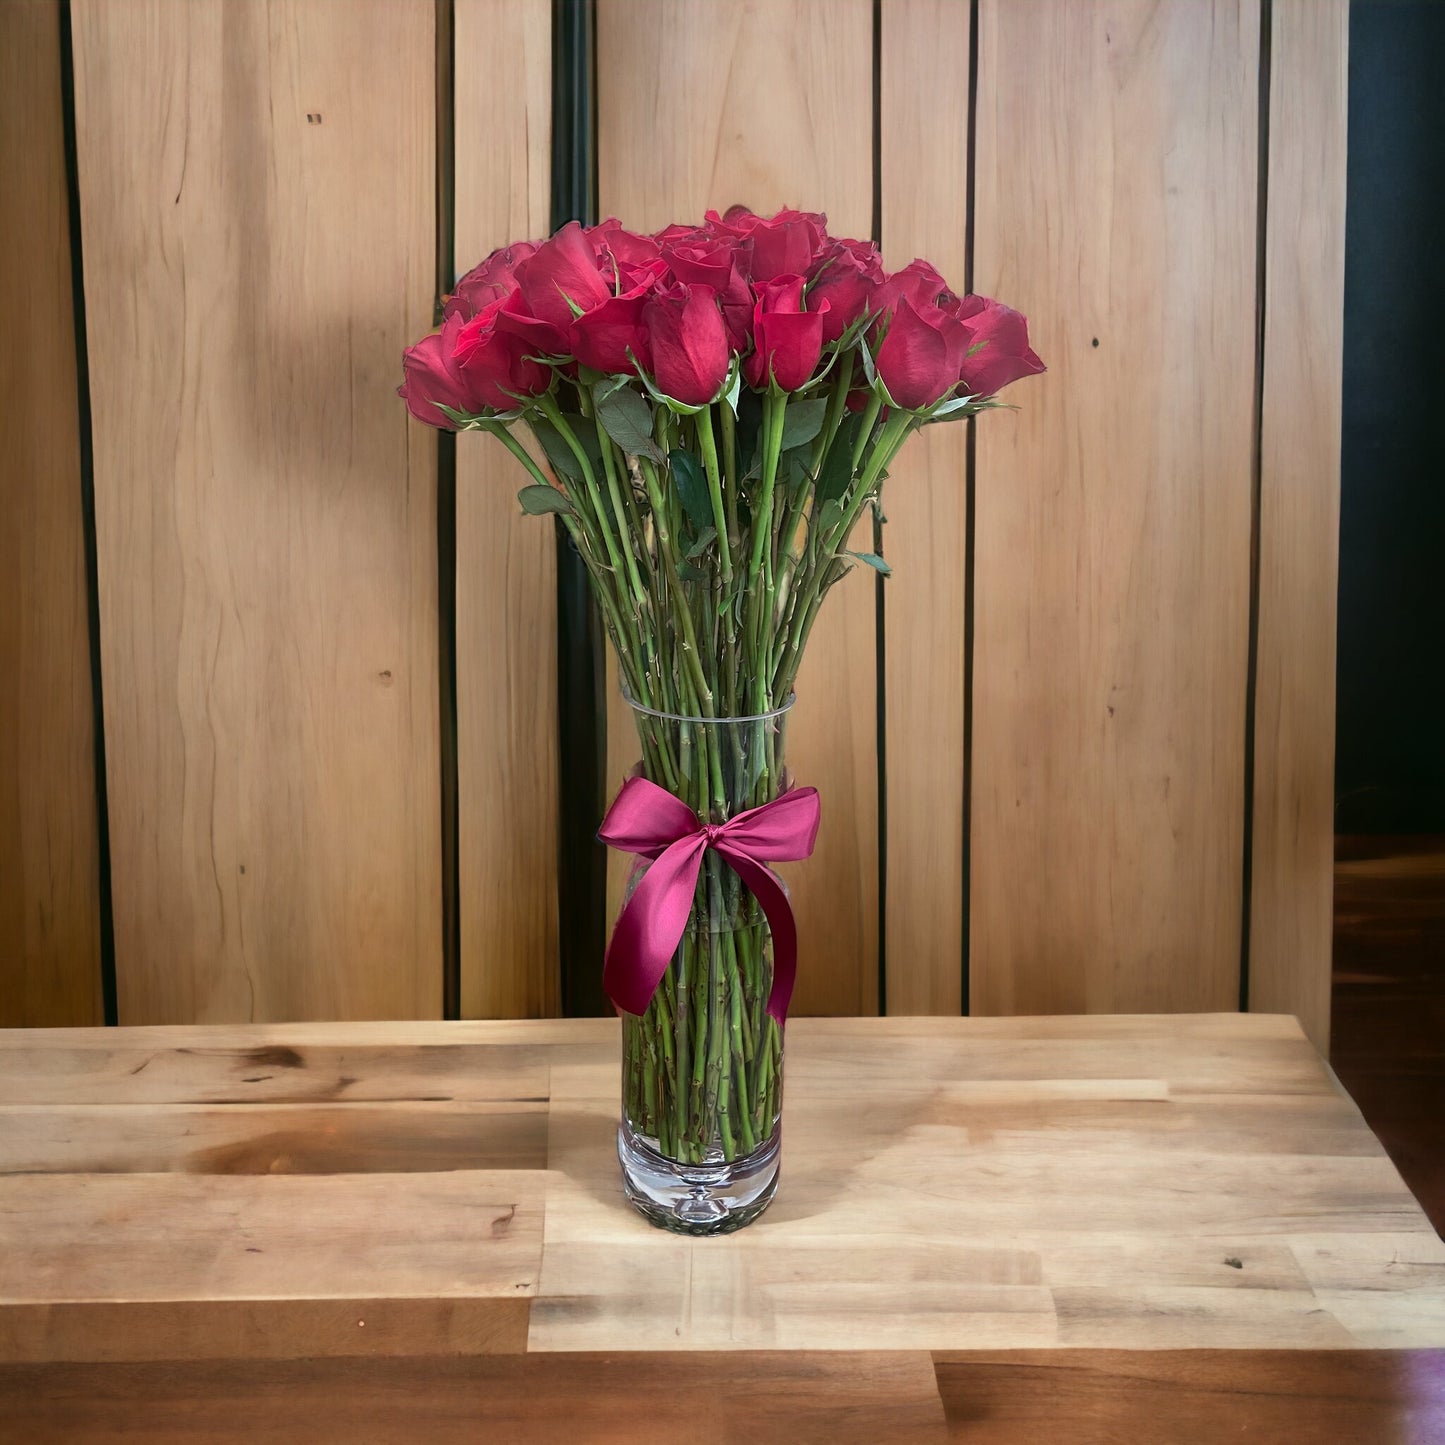 50 Stem Red Roses with a Clear Illusion Vase